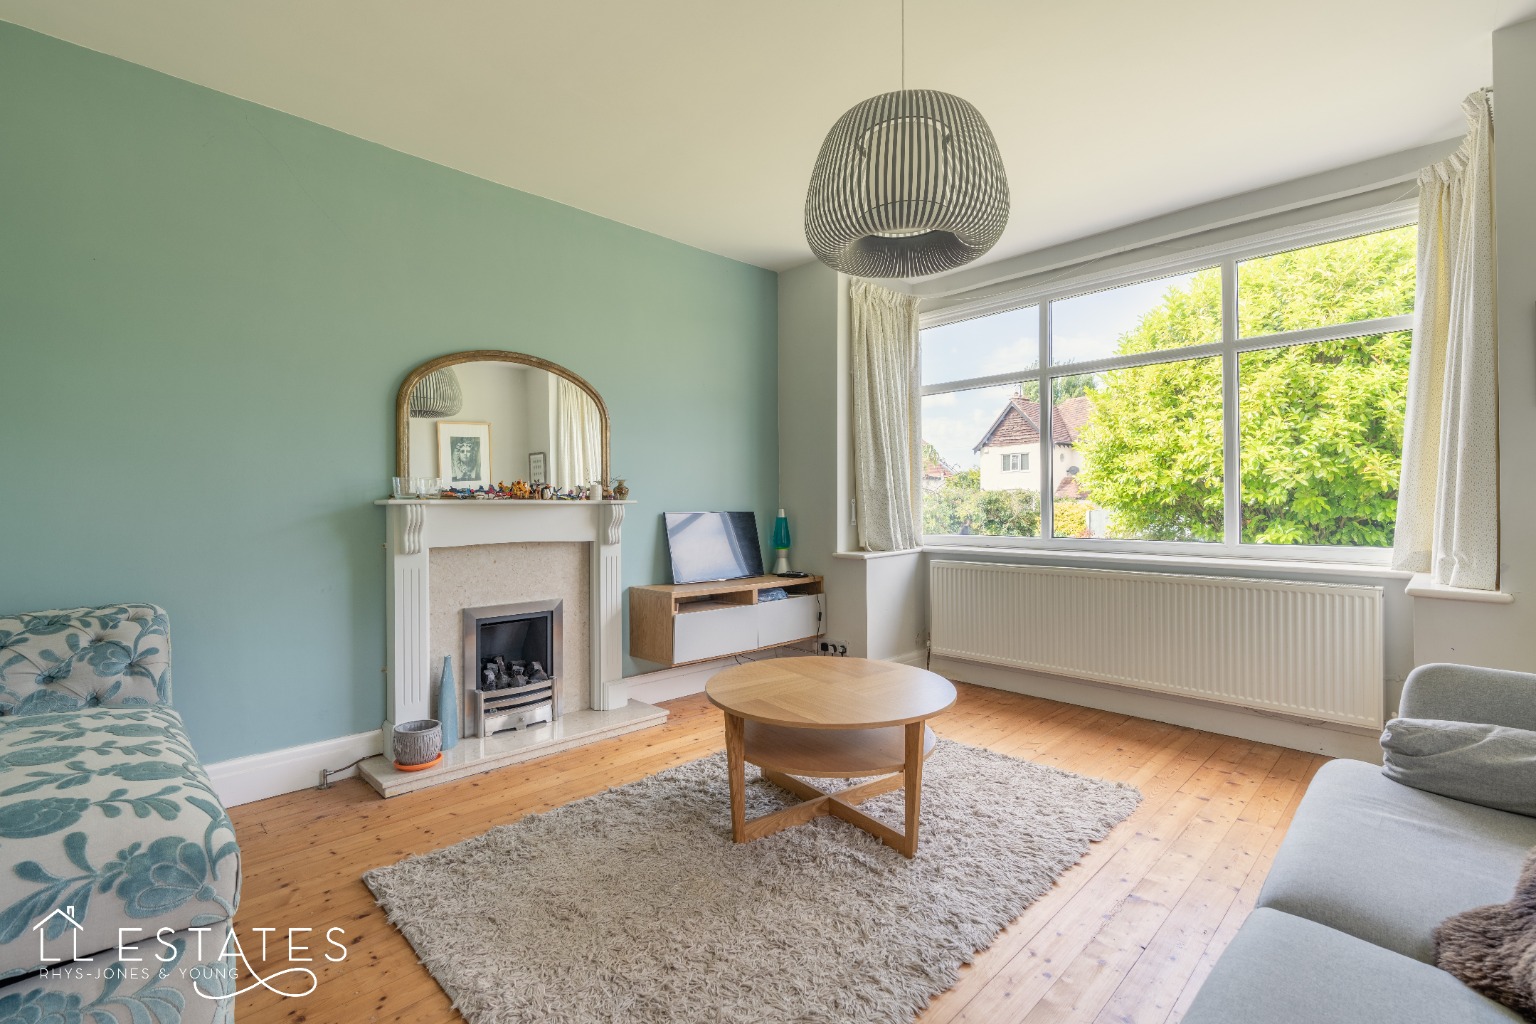 4 bed detached house for sale in Coed Mor Drive  - Property Image 5